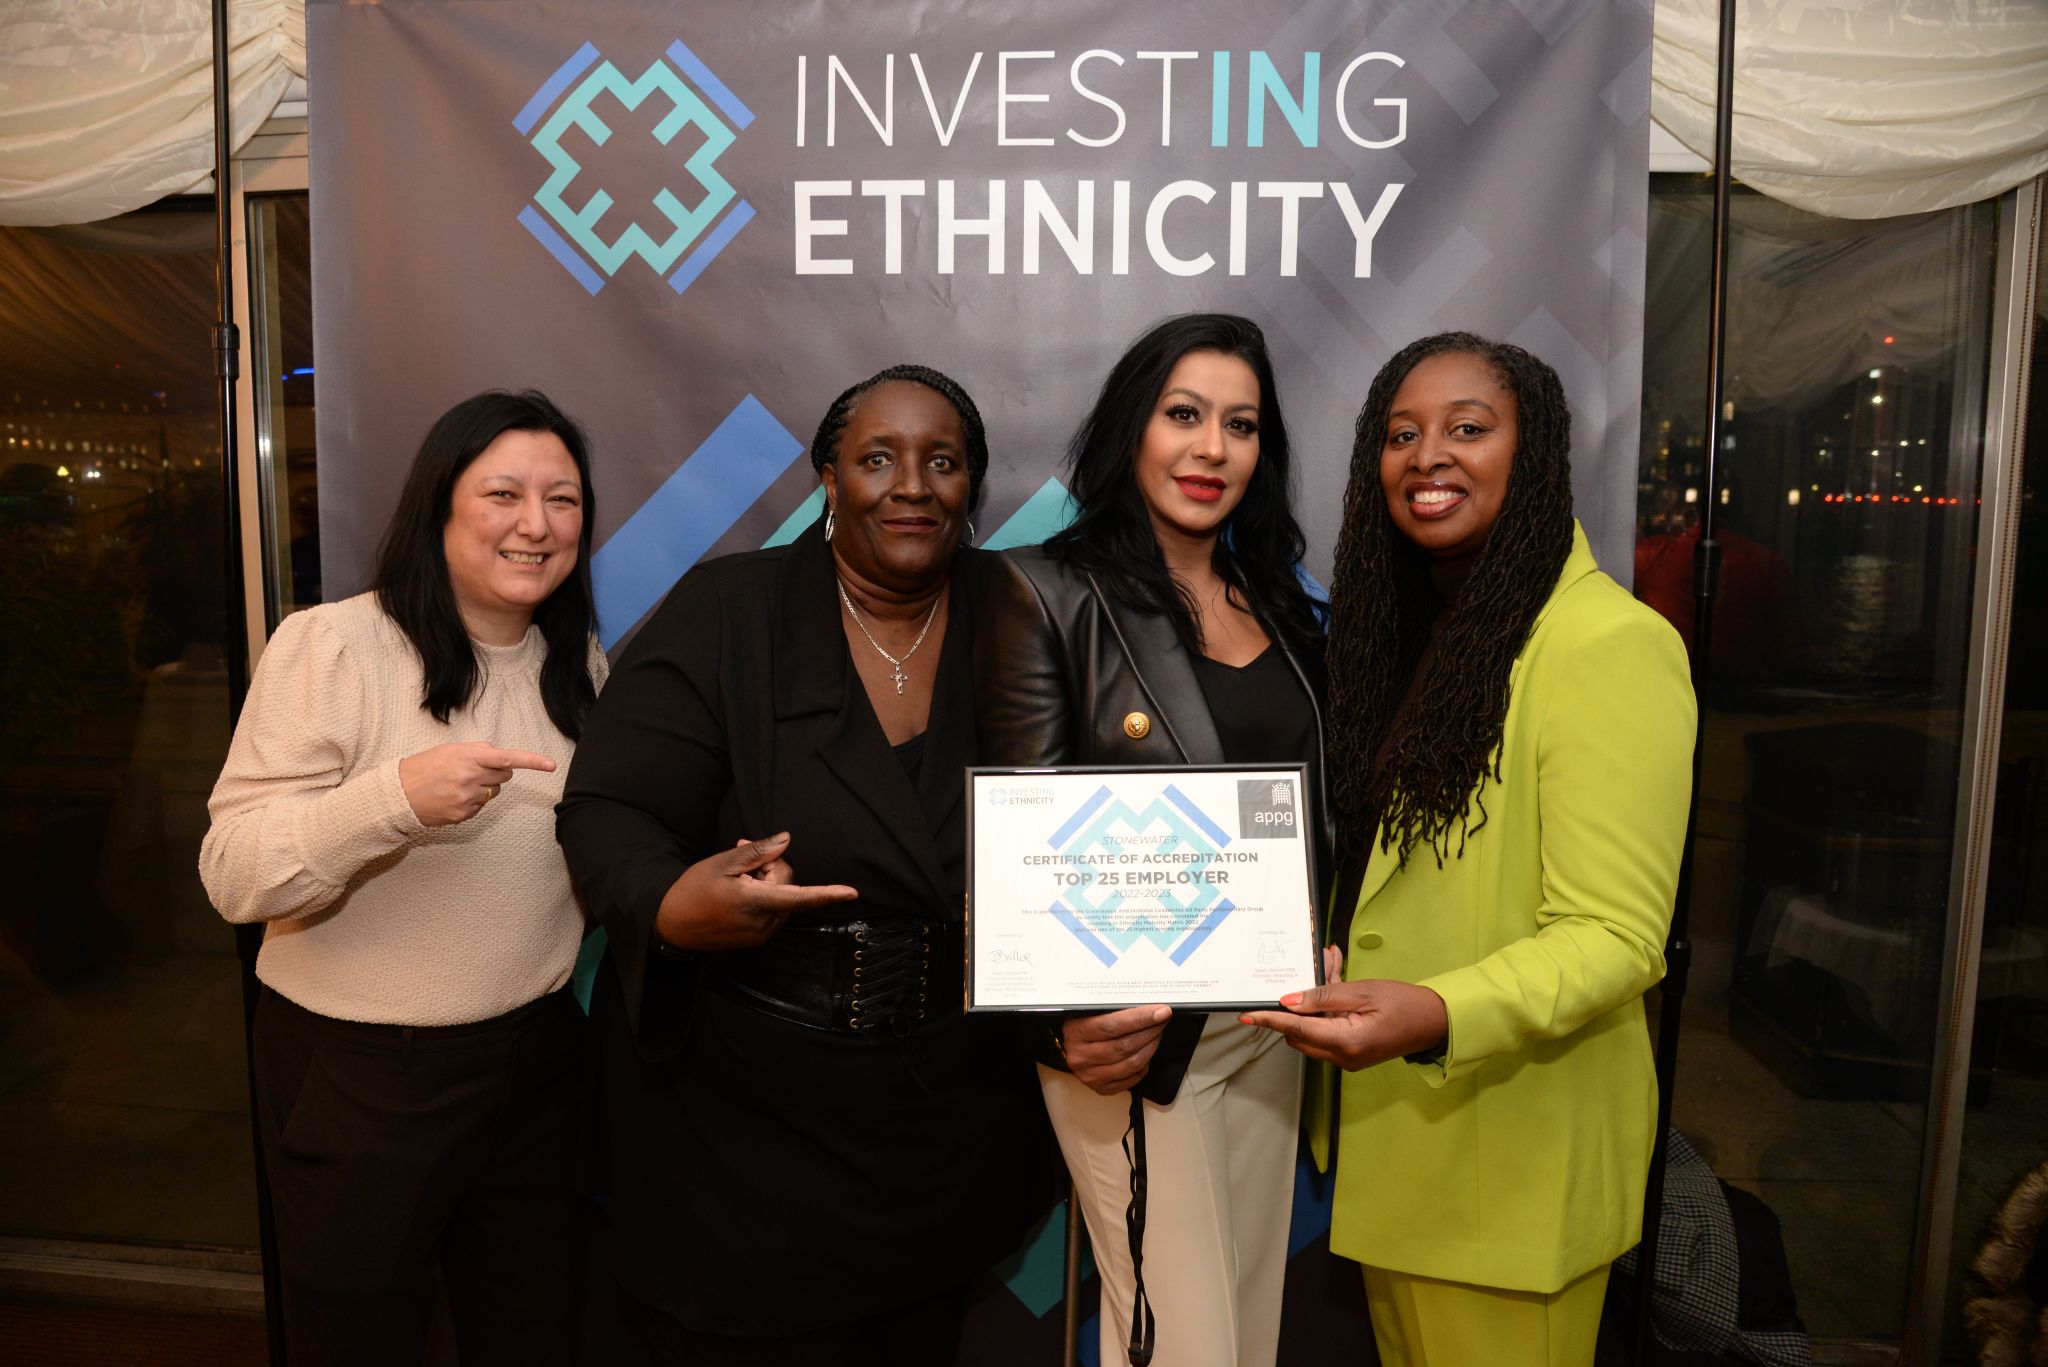 House Of Commons Event, pictured: Unknown, Cordelia Johney, Surena Masih, and Dawn Butler MP